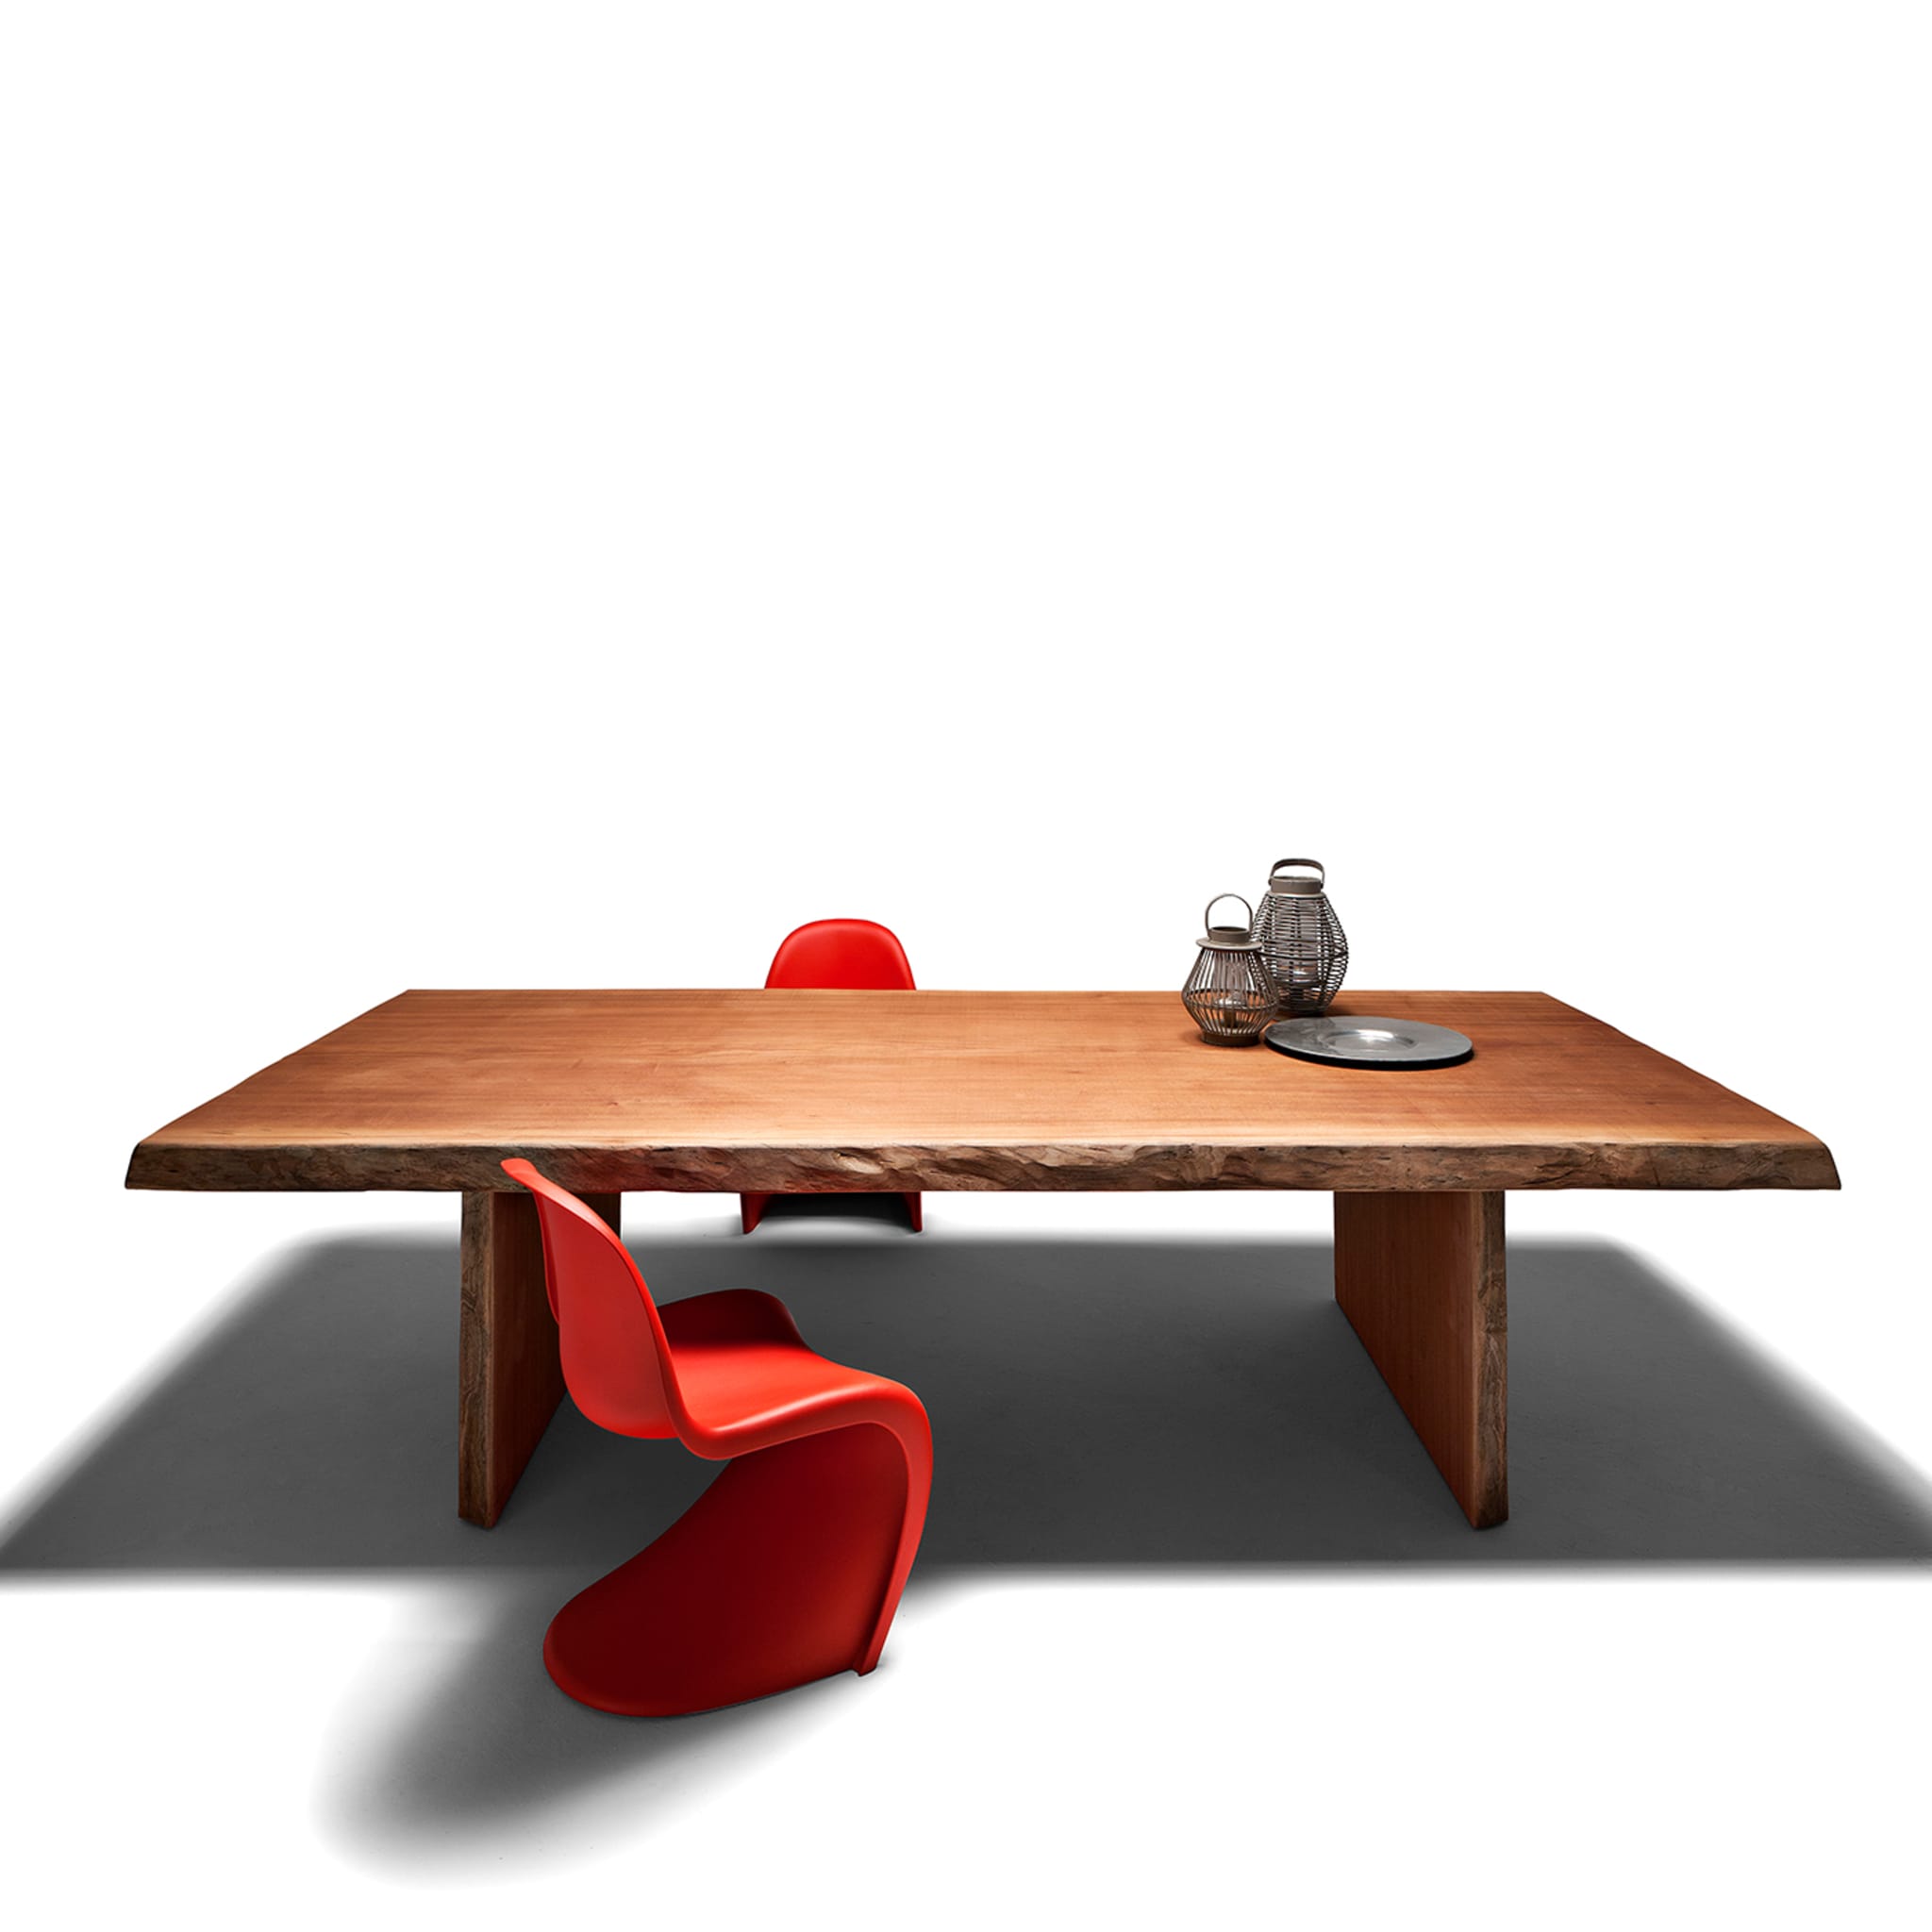 Individual Dinner Table by Ludovica and Roberto Palomba - Alternative view 1